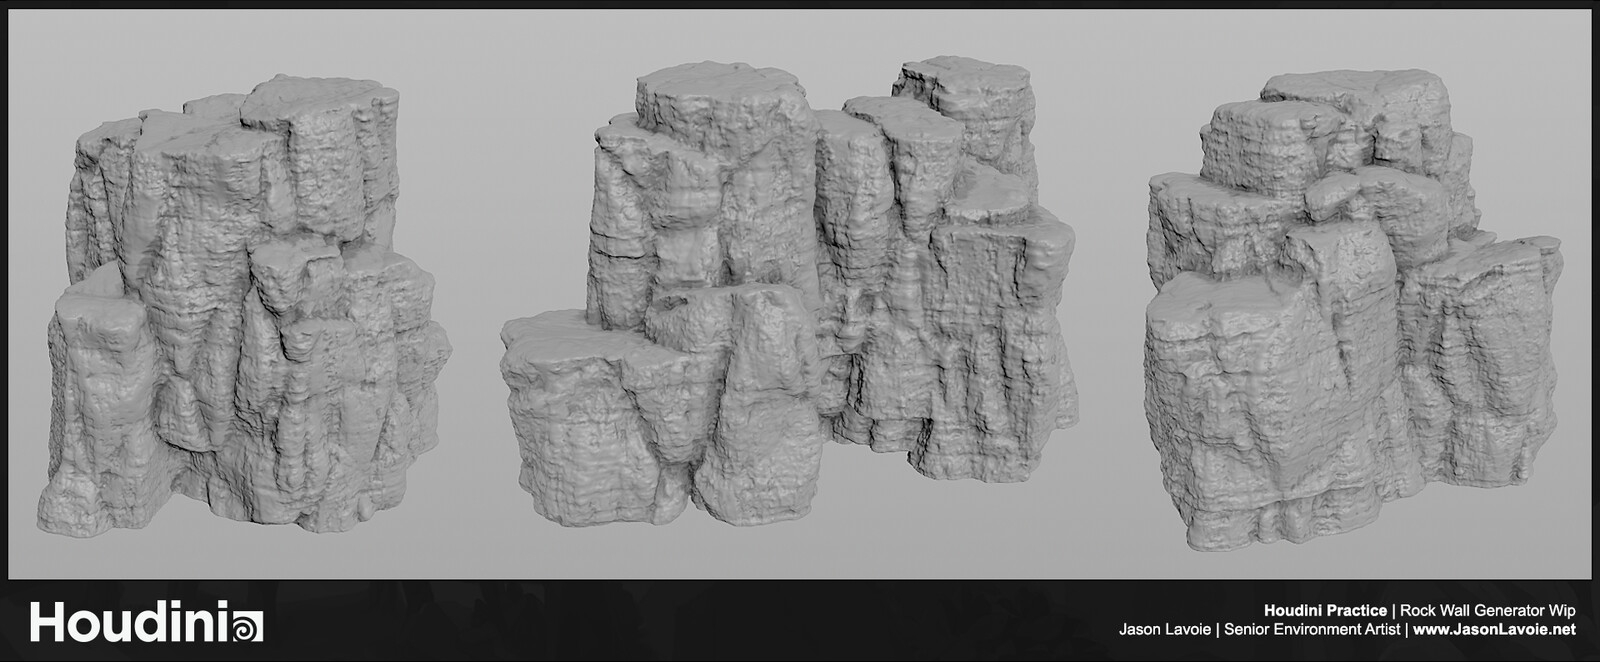 First Pass on a Houdini Rock Wall Generator - Not happy with the results, but learning the process!